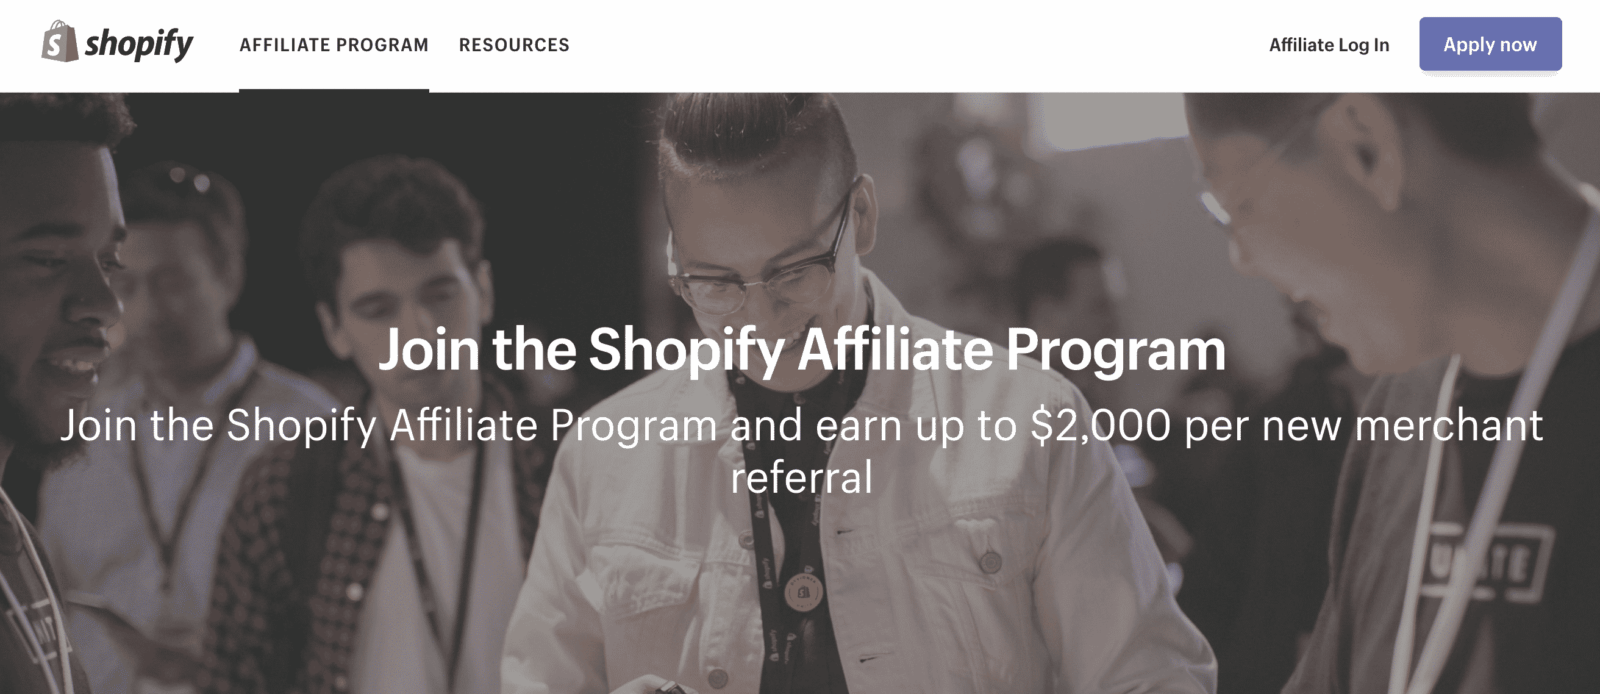 Best High Paying Affiliate Programs of July - 2020 - WordPress Tips and Tricks for Amateur Bloggers